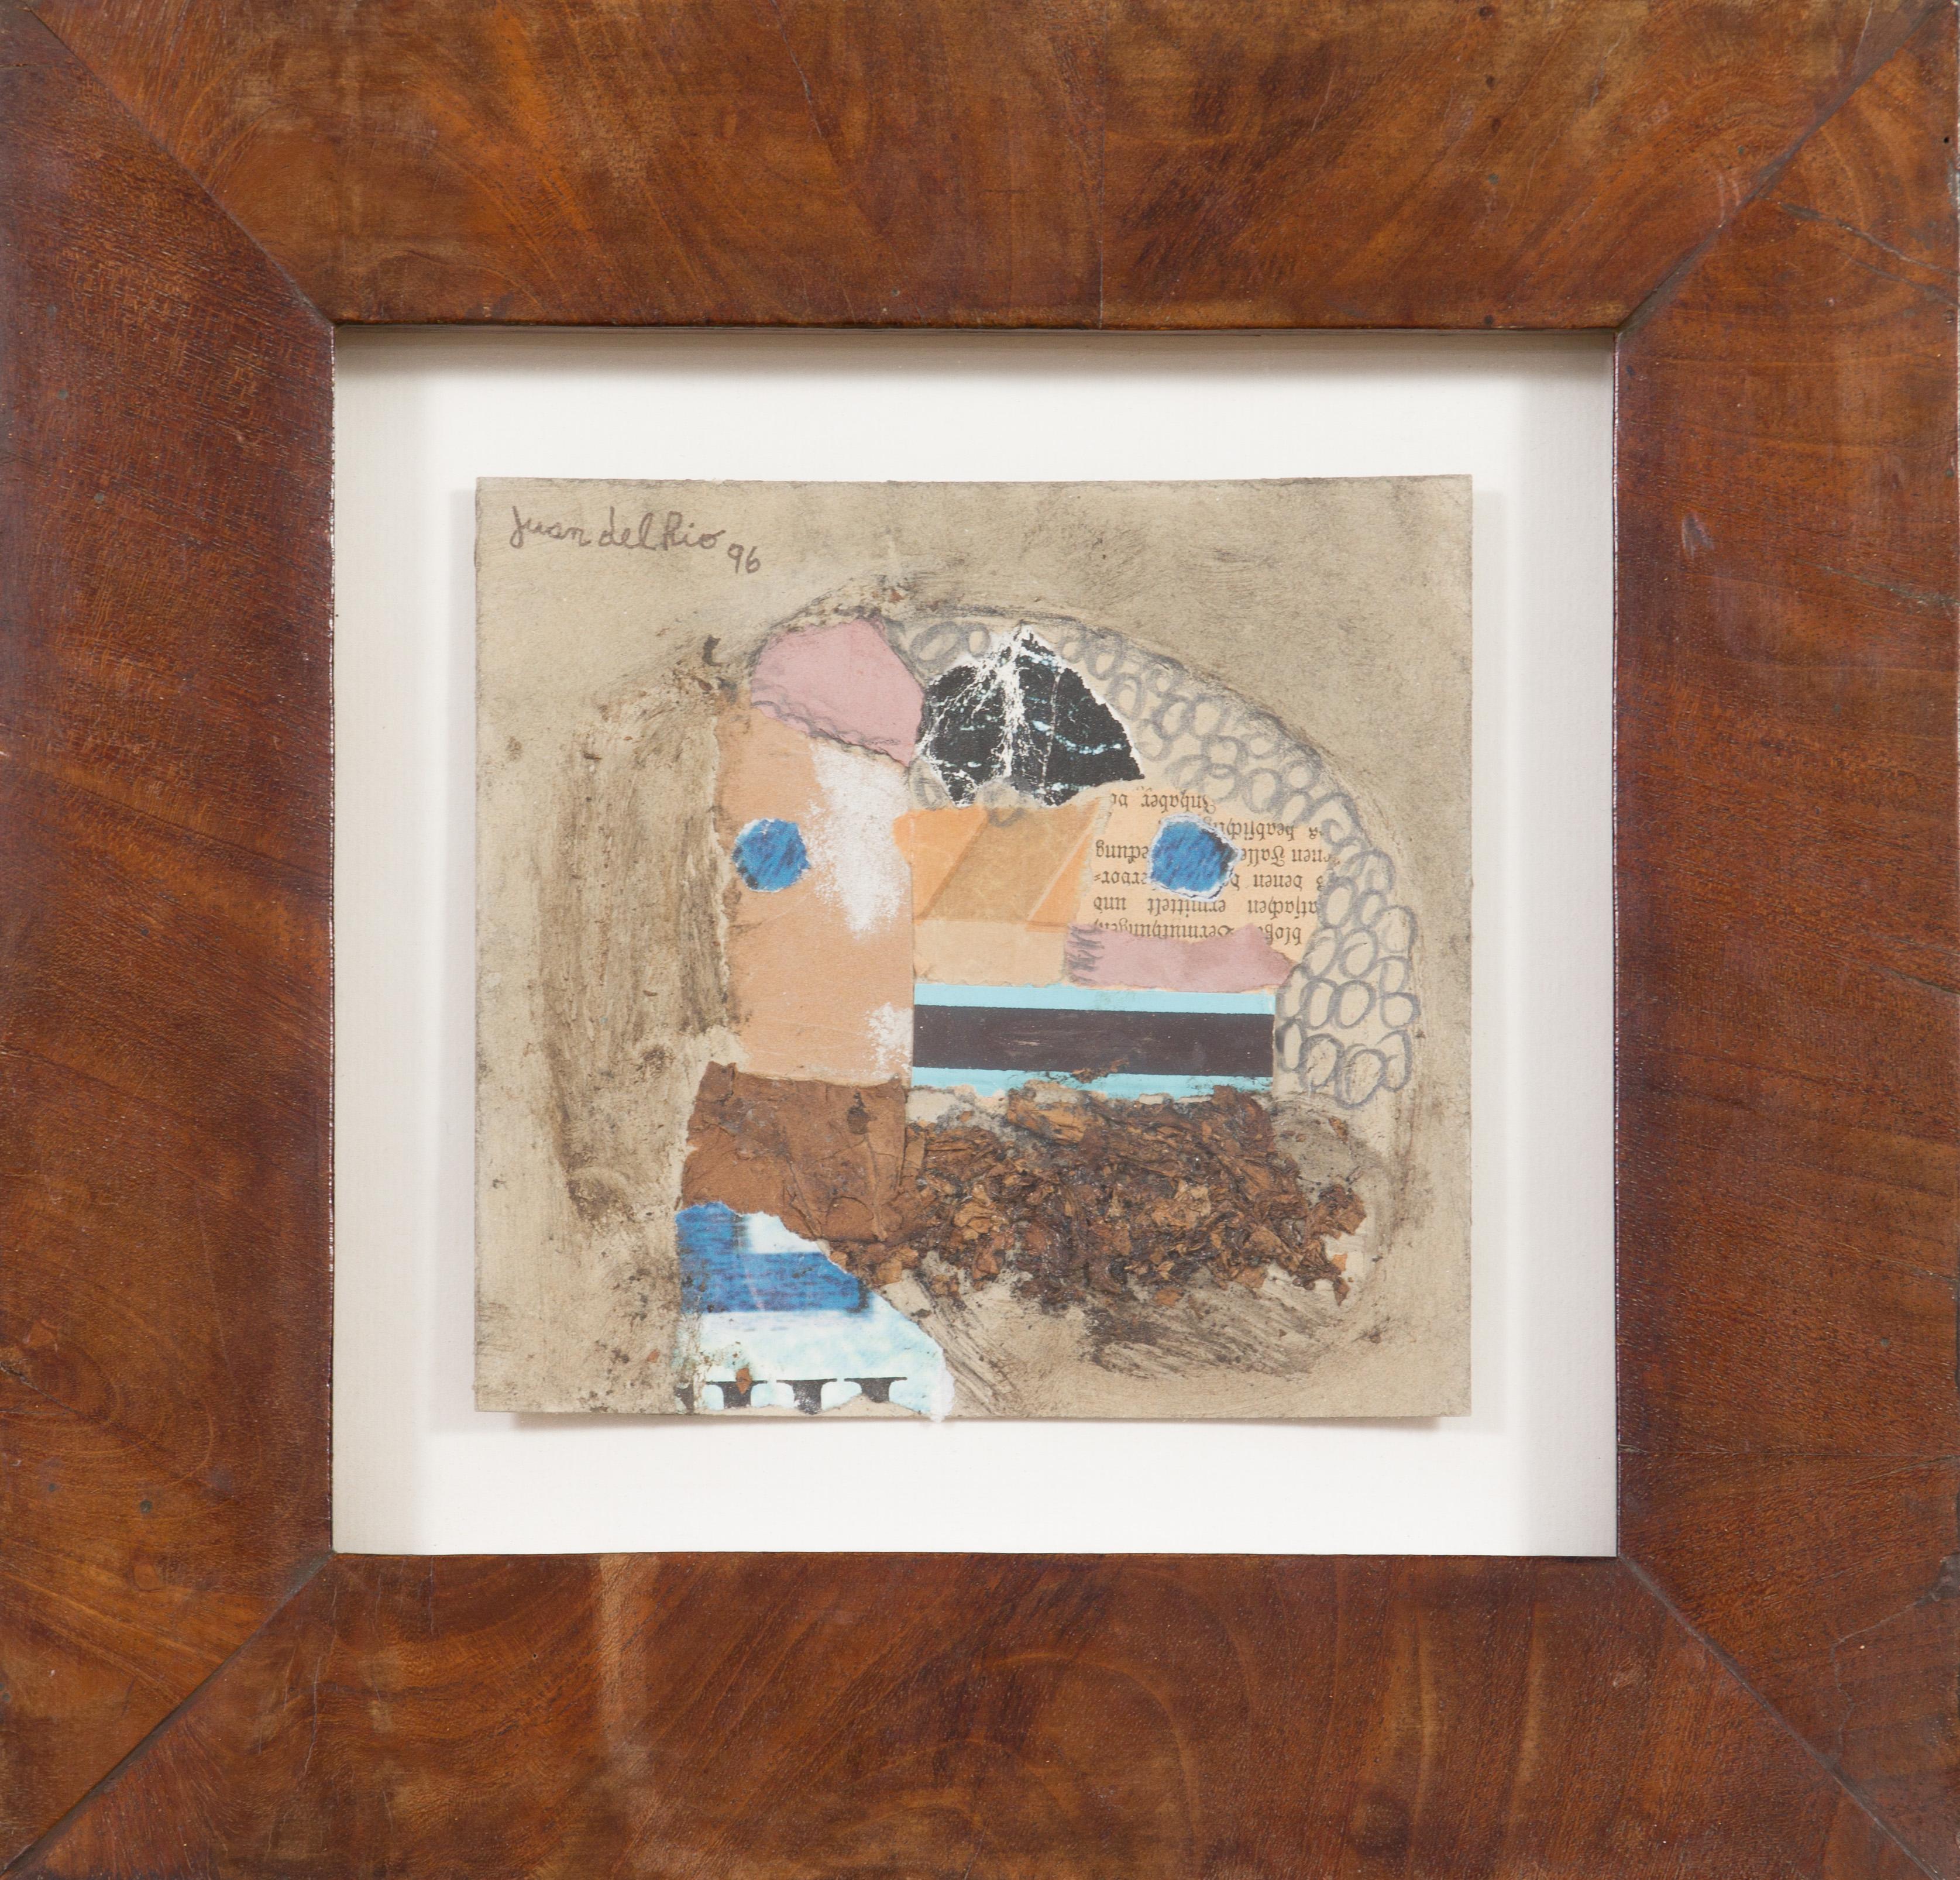 Assemblage (Untitled) - Contemporary Mixed Media Art by Juan del Rio